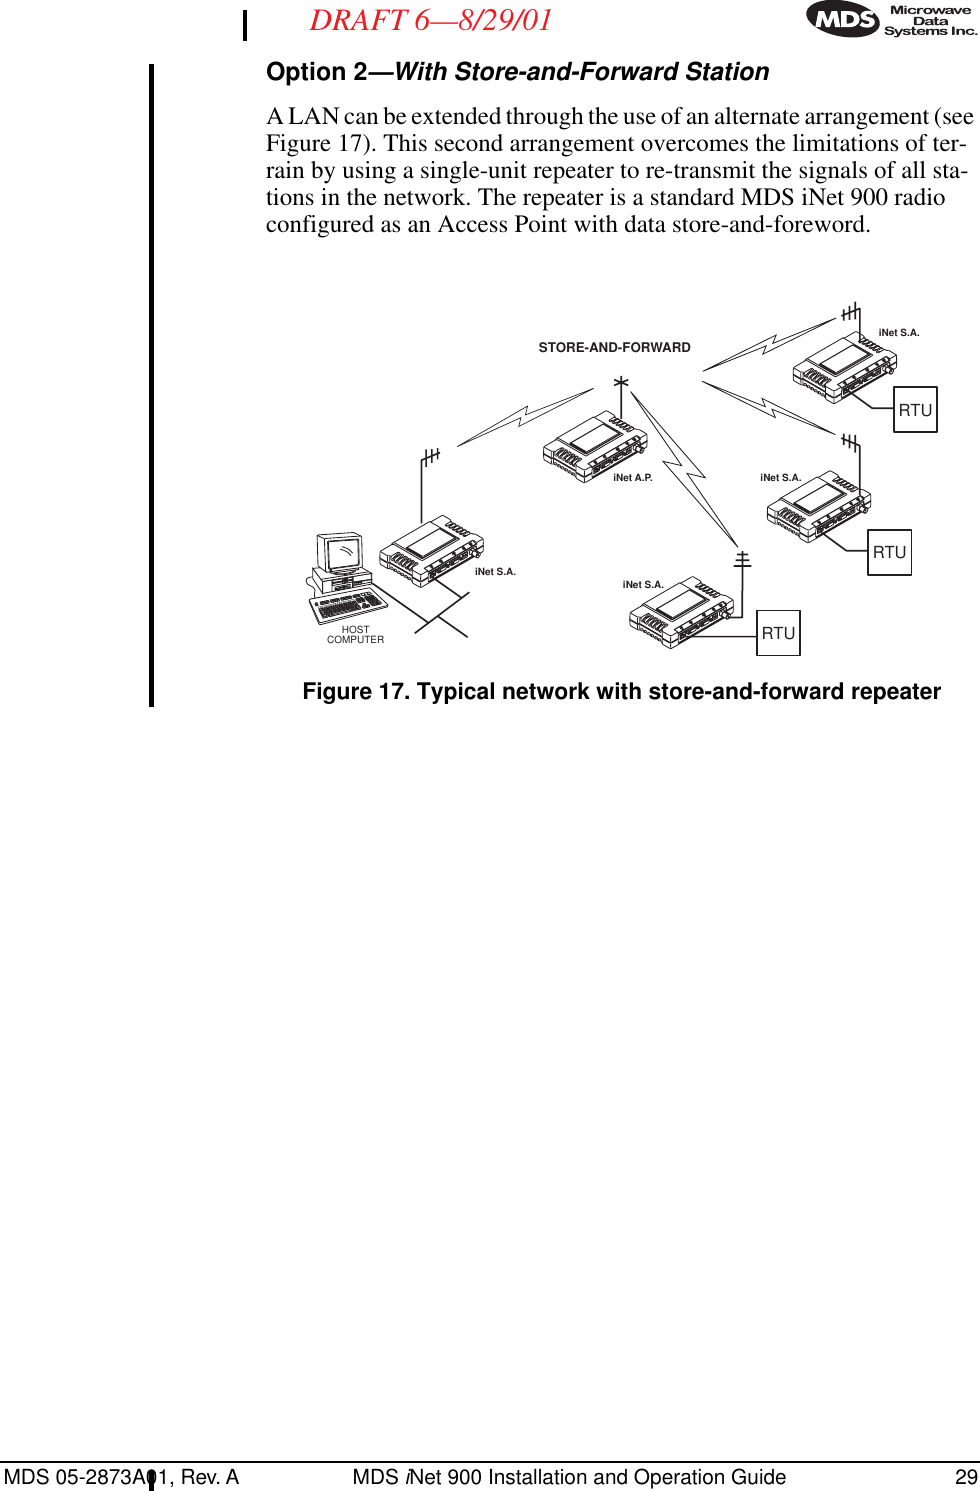 MDS 05-2873A01, Rev. A MDS iNet 900 Installation and Operation Guide 29DRAFT 6—8/29/01Option 2—With Store-and-Forward StationA LAN can be extended through the use of an alternate arrangement (see Figure 17). This second arrangement overcomes the limitations of ter-rain by using a single-unit repeater to re-transmit the signals of all sta-tions in the network. The repeater is a standard MDS iNet 900 radio configured as an Access Point with data store-and-foreword.Invisible place holderFigure 17. Typical network with store-and-forward repeateriNet A.P.iNet S.A.iNet S.A.iNet S.A.iNet S.A.RTUHOSTCOMPUTERRTURTUSTORE-AND-FORWARD